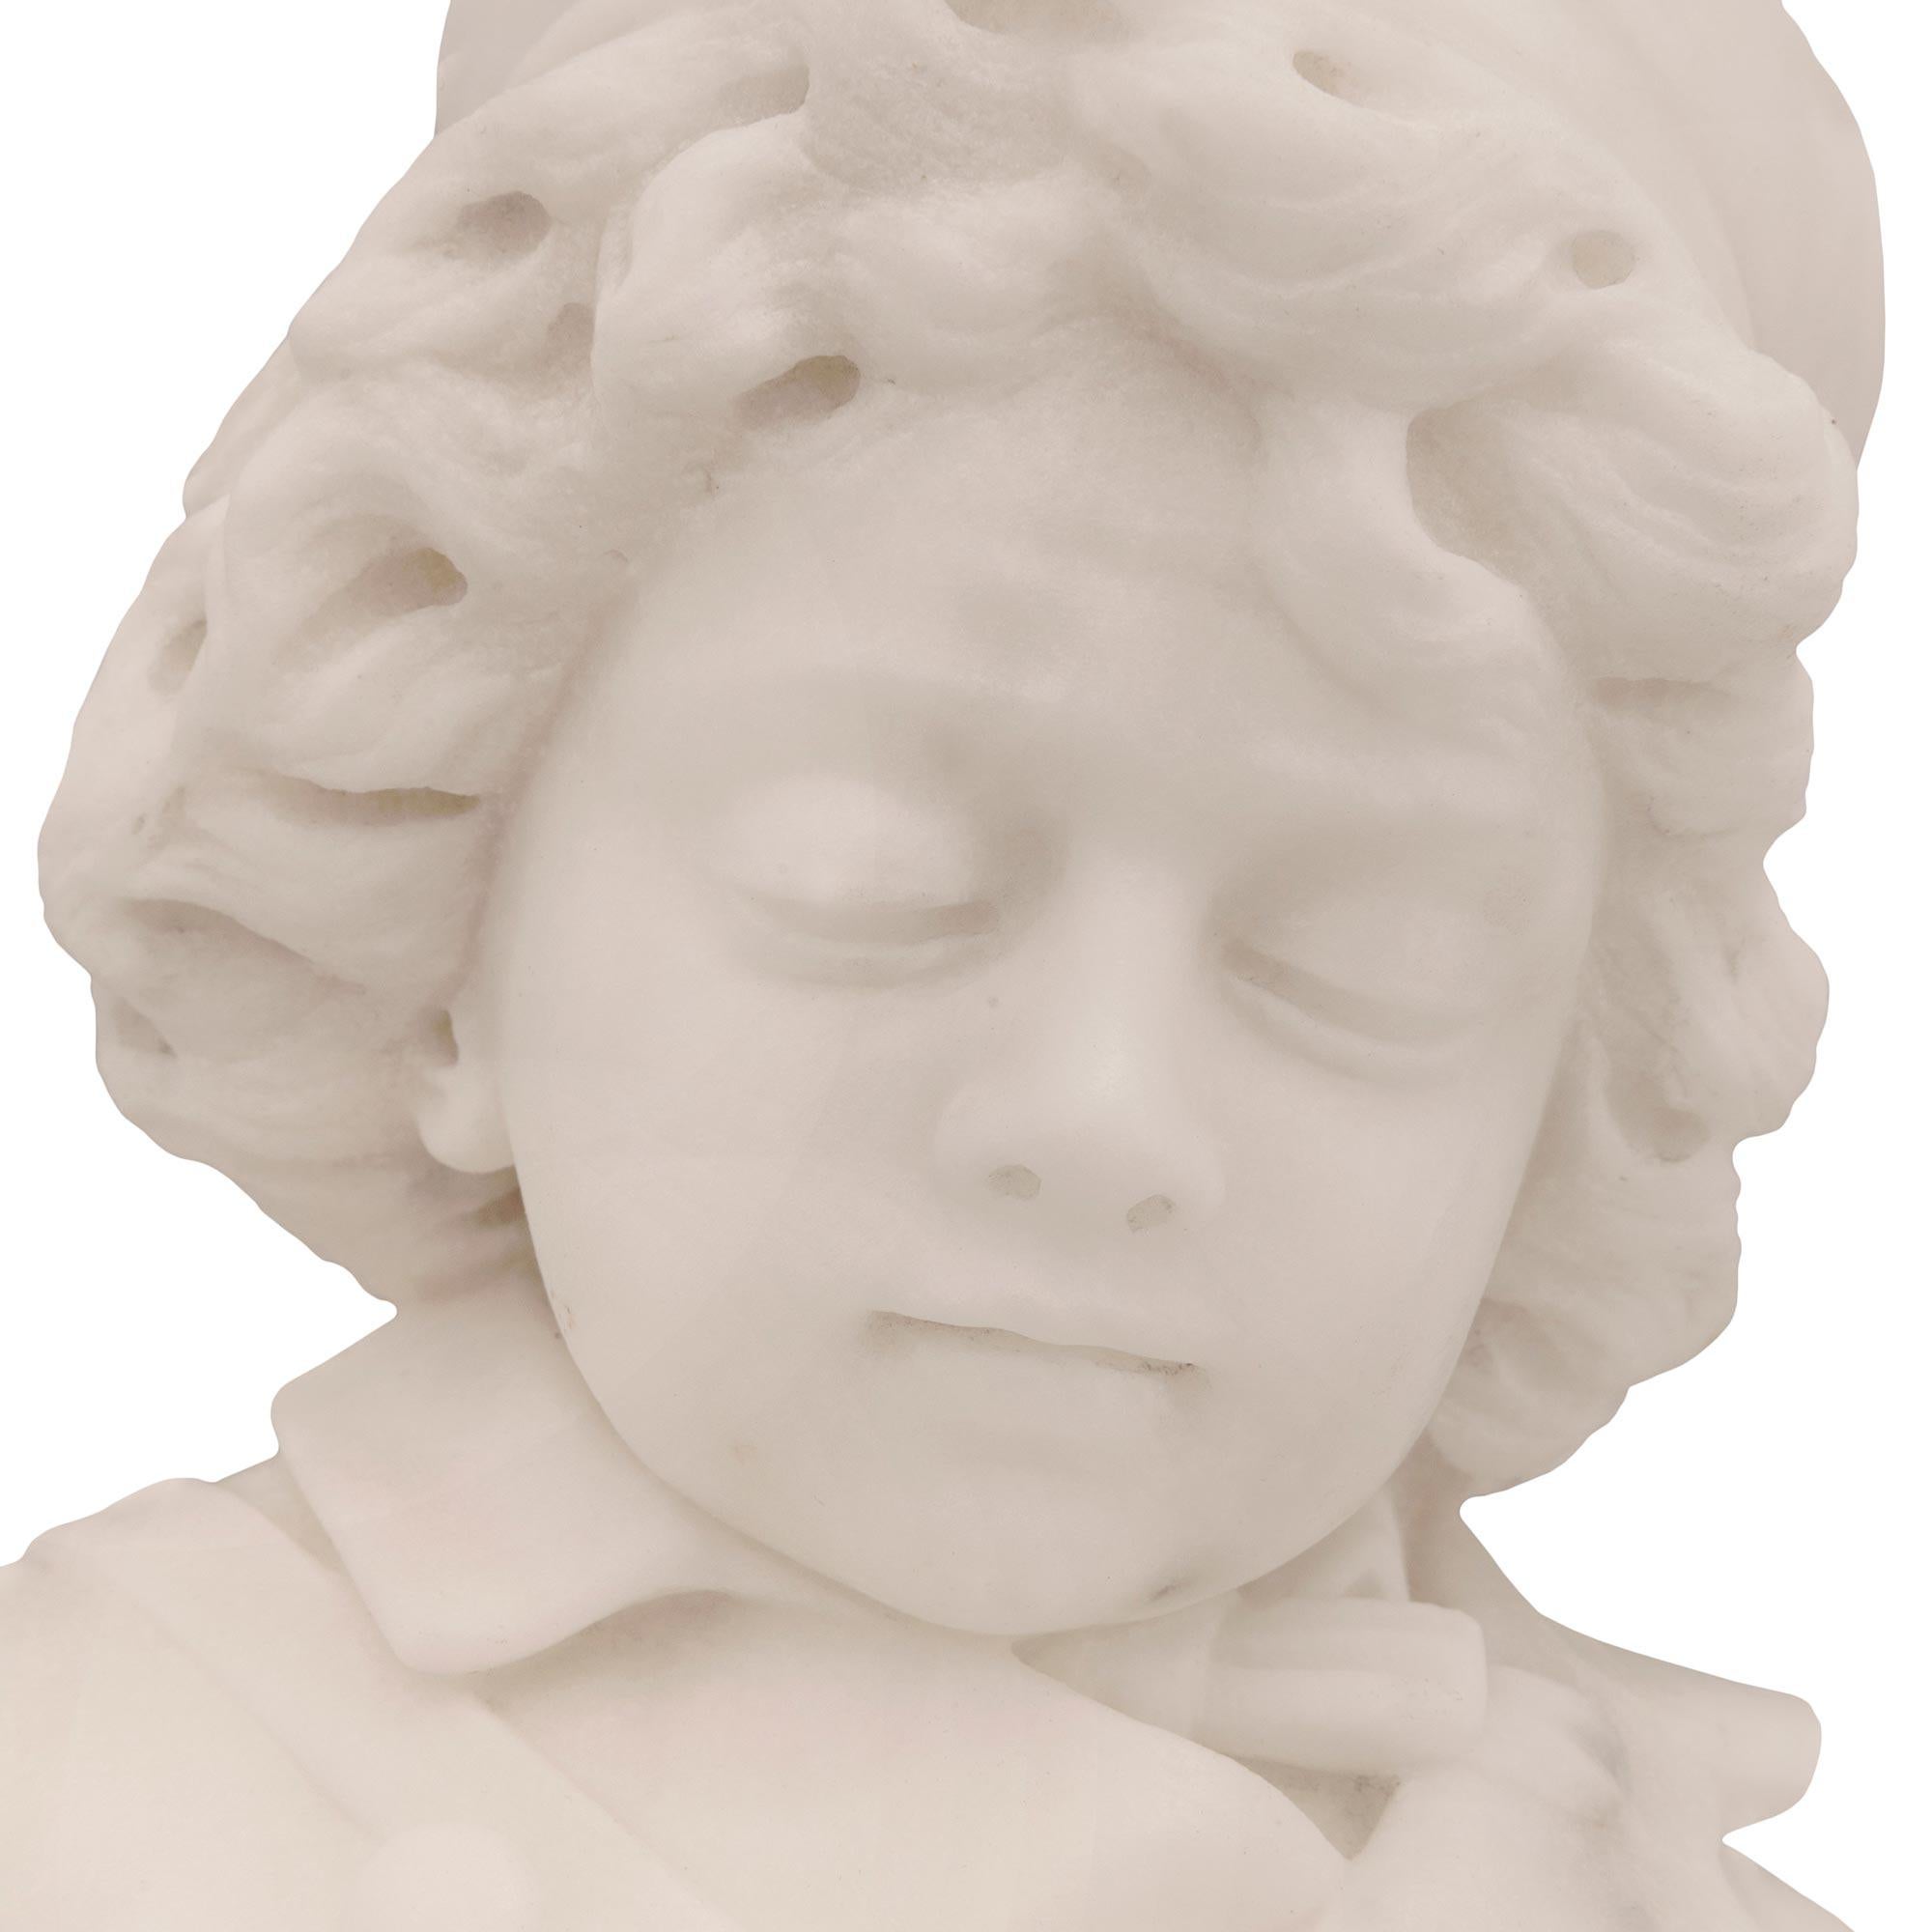 Italian 19th Century White Carrara Marble Statue of a Young Boy Reading a Book For Sale 2